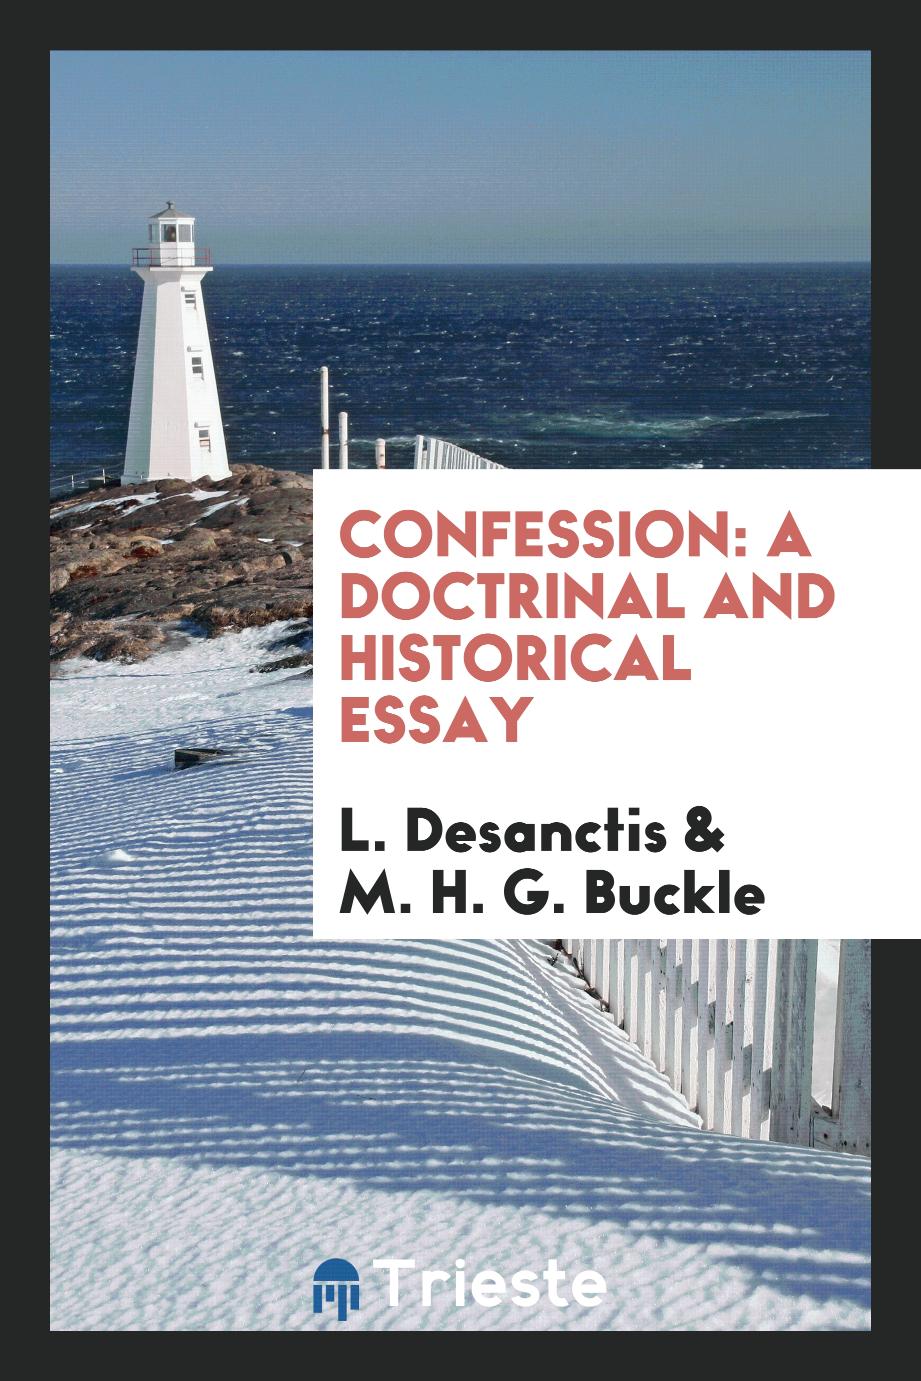 Confession: A Doctrinal and Historical Essay